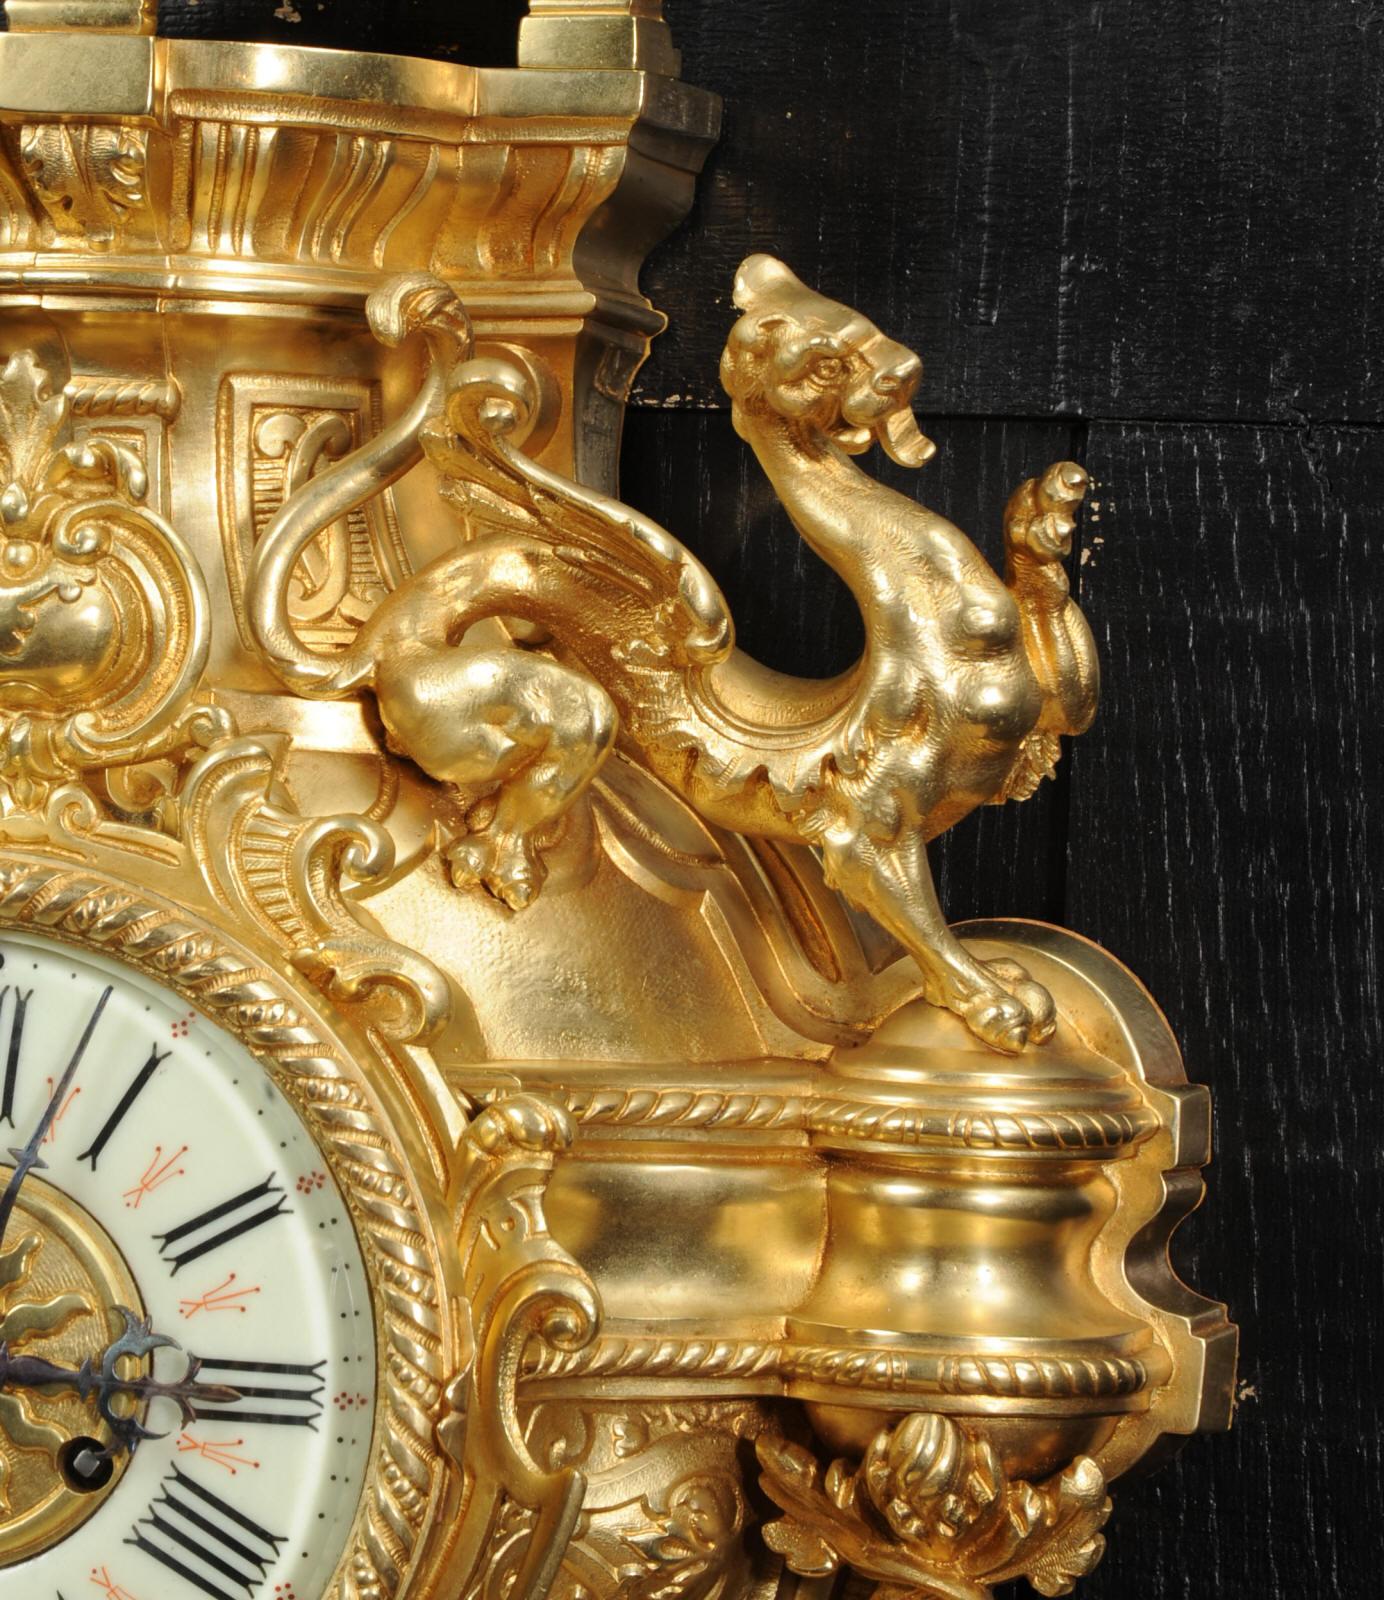 Baroque Huge Antique French Gilt Bronze Cartel Wall Clock with Dragons